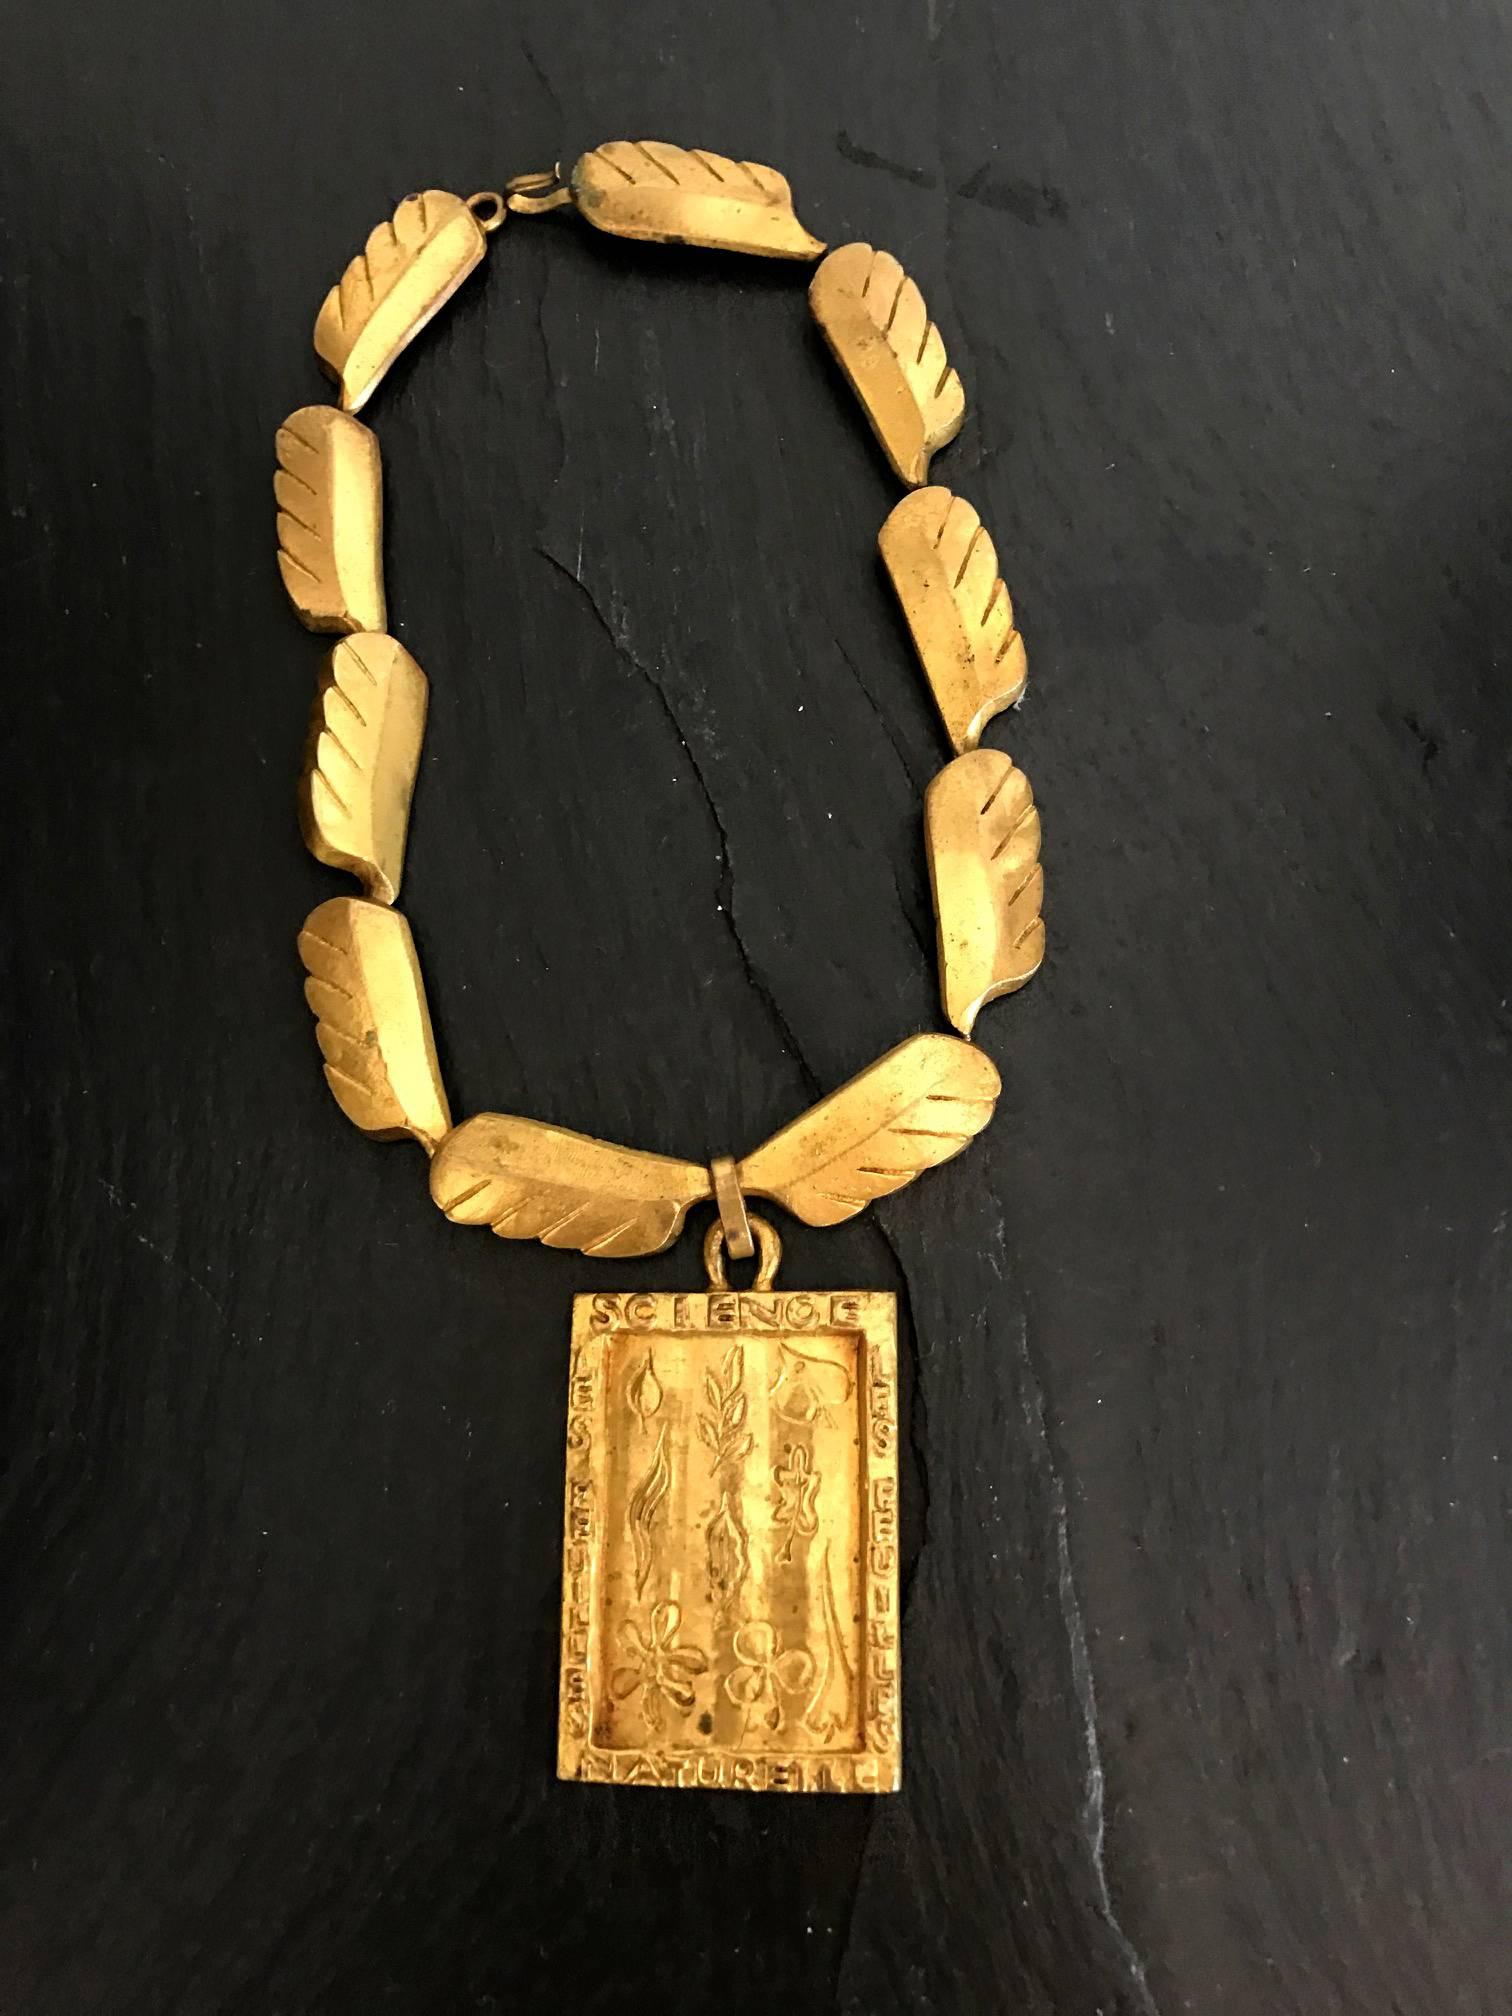 A beautiful gilt bronze necklace with feature design links and a pendant by French jeweler Line Vautrin, circa 1940s. Bronze leaf pattern linked chains attached to a square plaque pendant, on which one can find many botanical leaf motif and